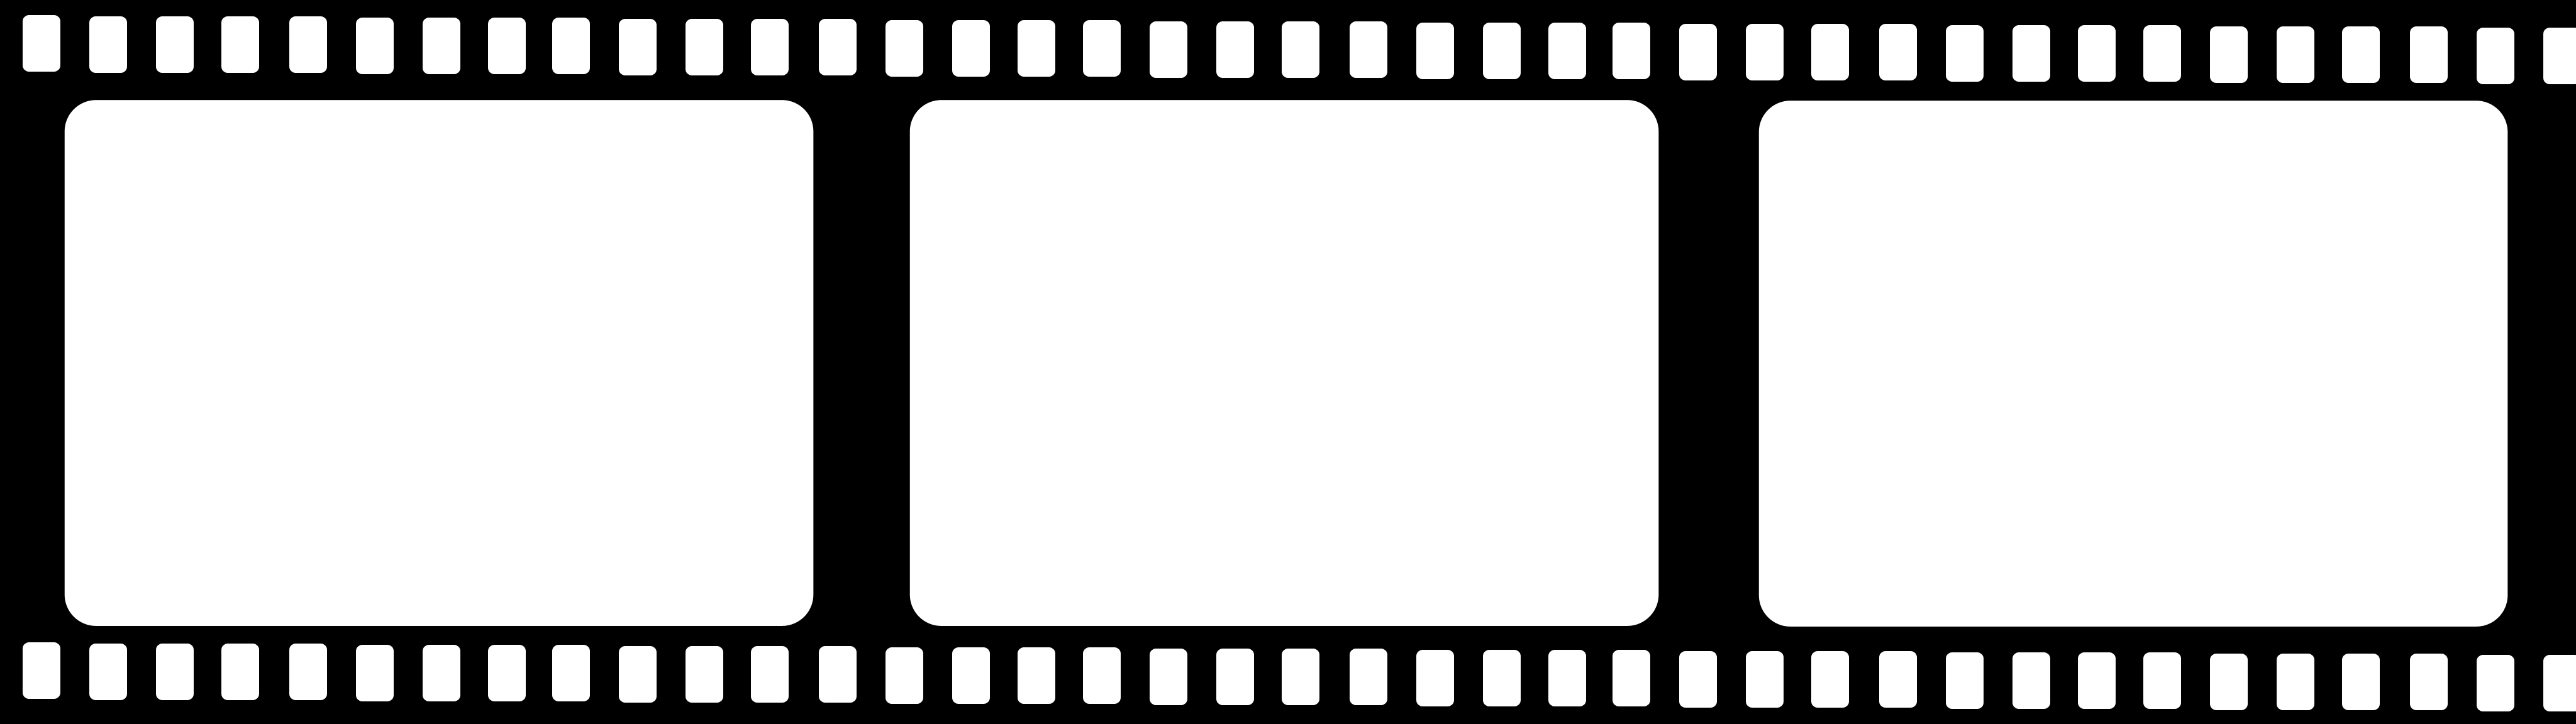 Movie Reel Border - Clipart library